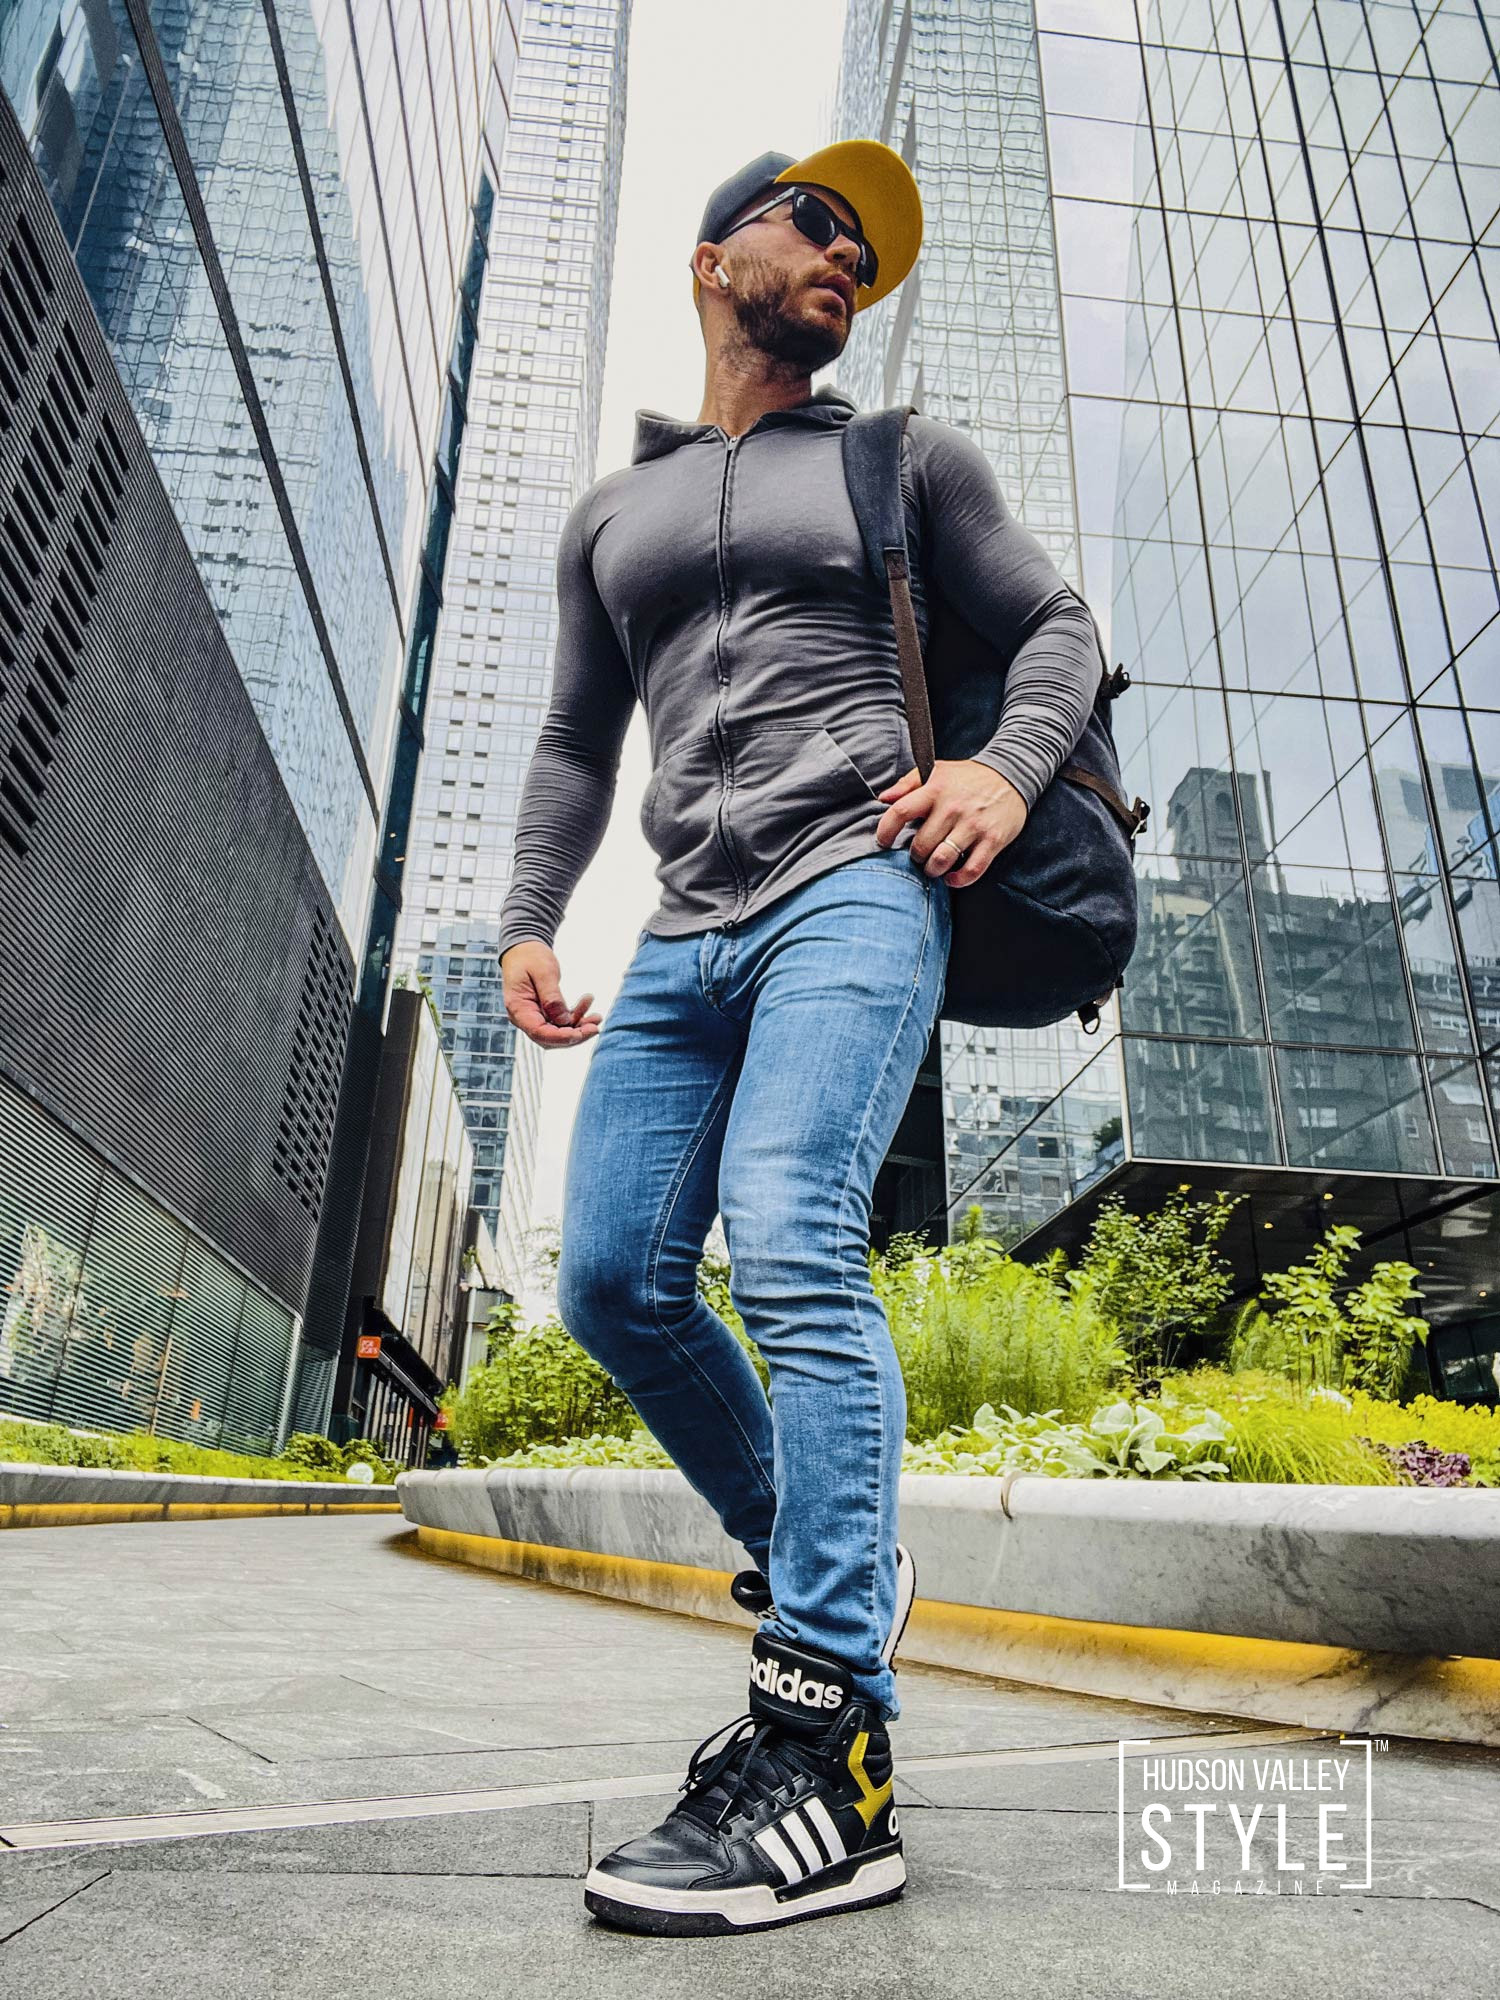 Here is a Perfect Gym Bag for Classy New Yorkers – Fitness Model/ Photographer Maxwell Alexander